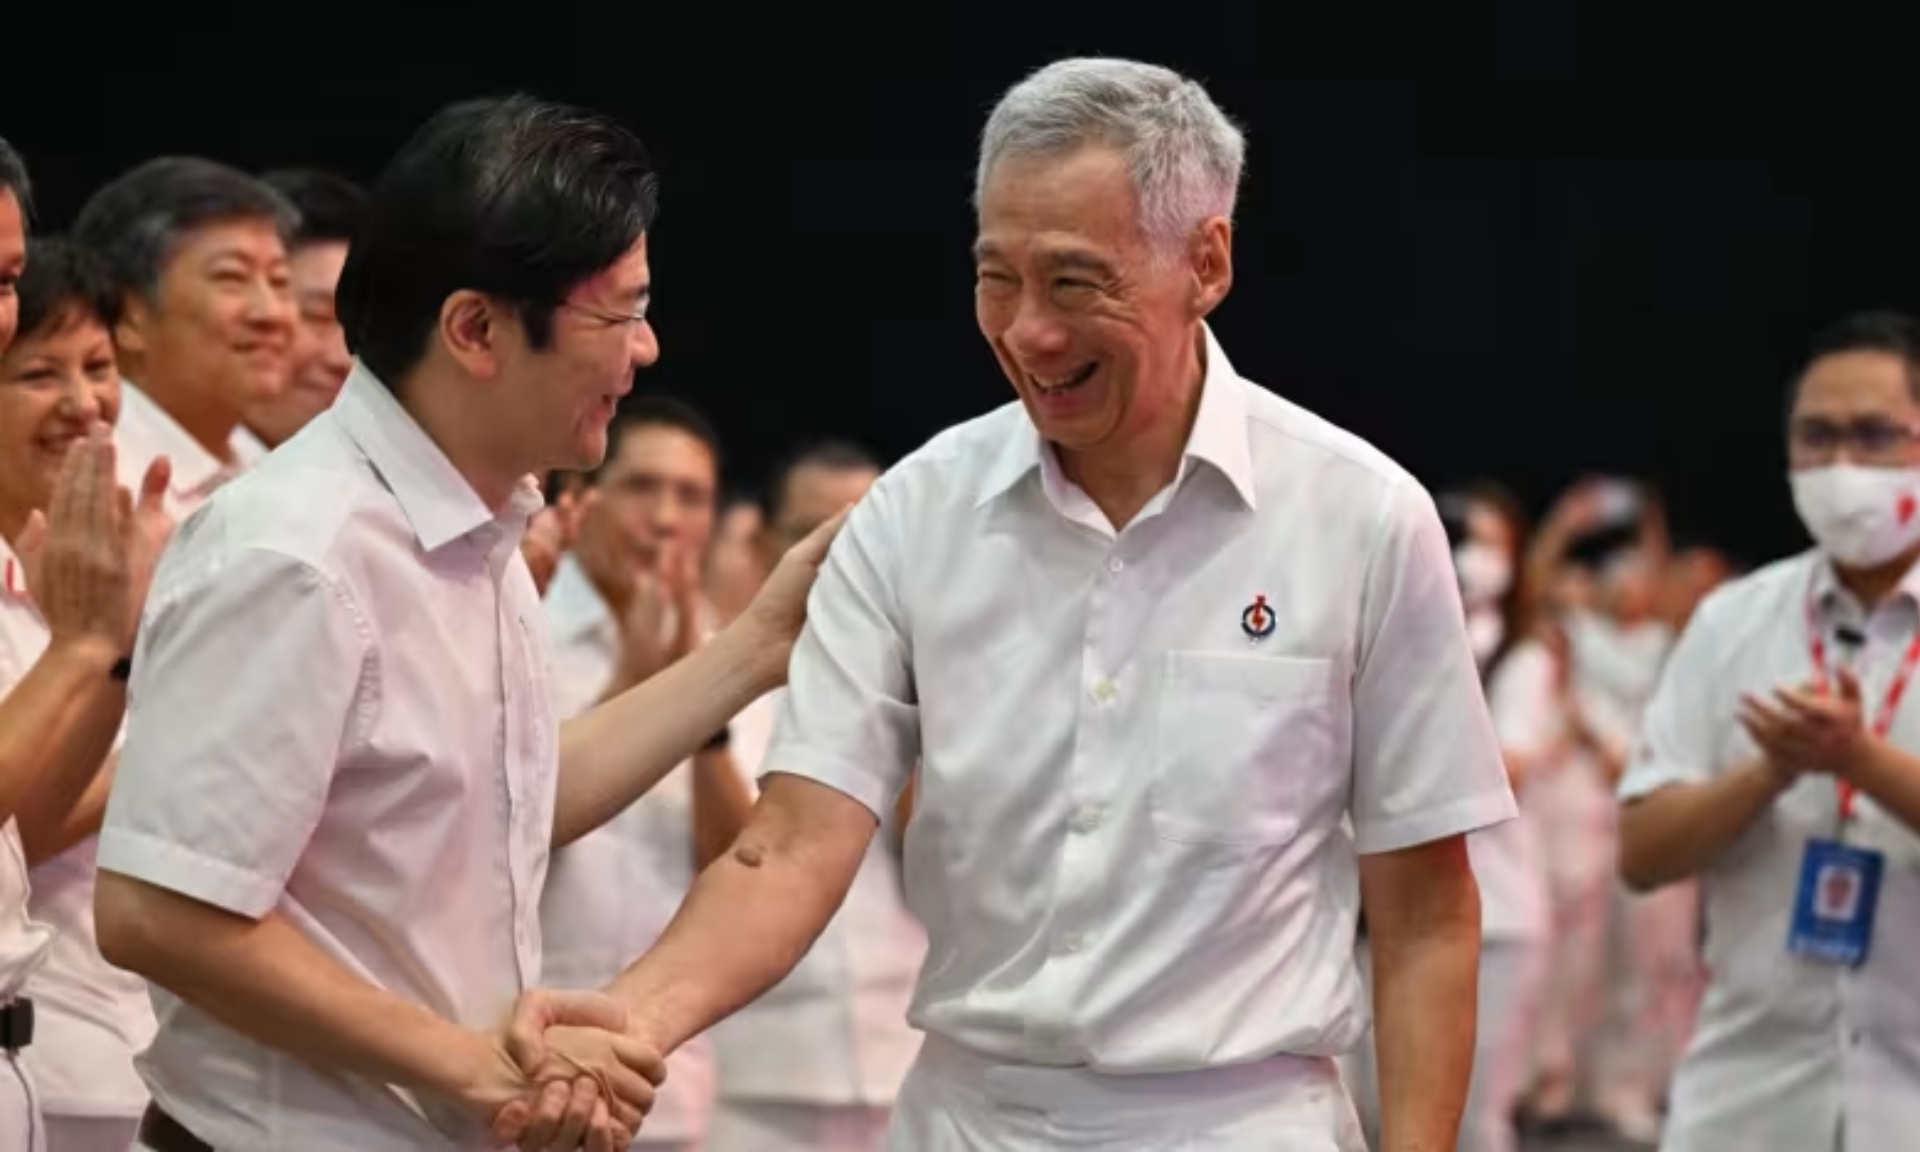 Singapore Prime Minister and People's Action Party secretary-general Lee Hsien Loong shakes hands with Deputy Prime Minister